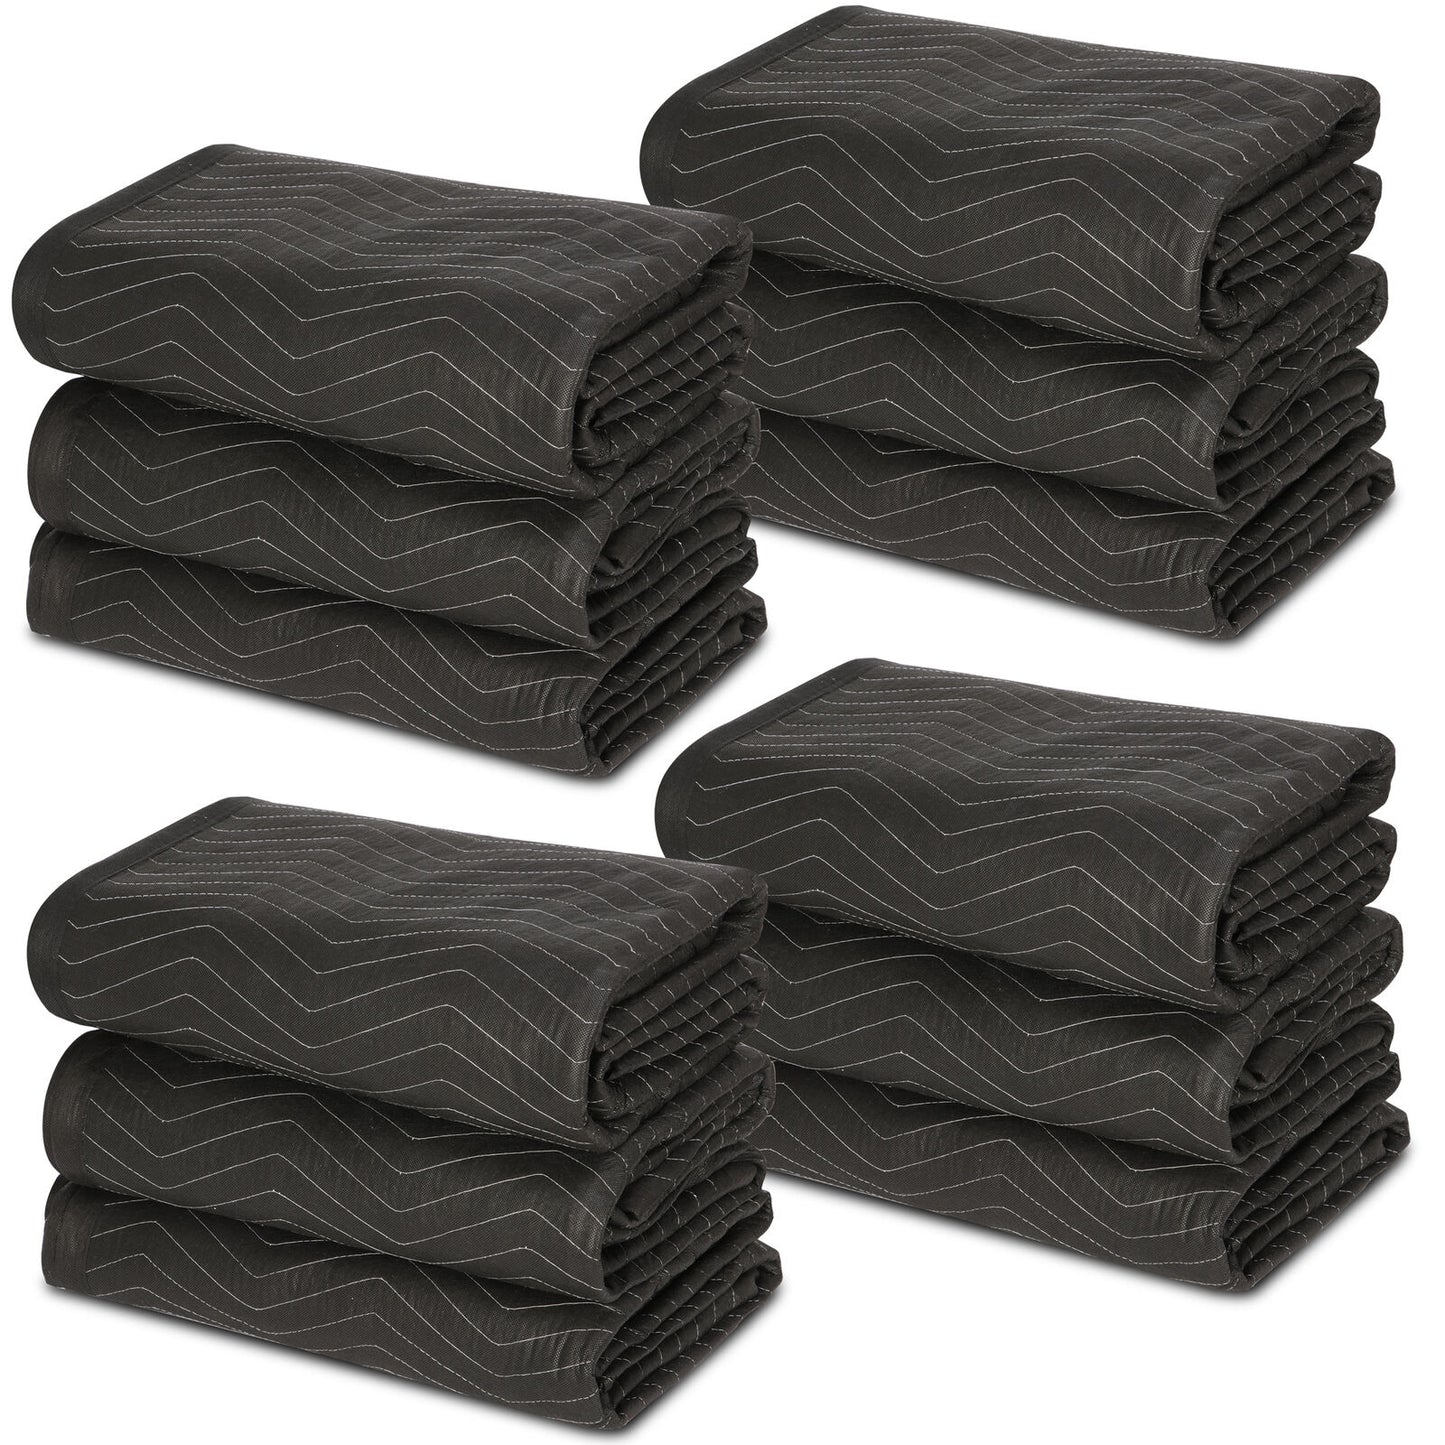 12 Heavy Duty Moving Packing Blankets Ultra Thick Pro 72" x 80" Furniture Pads